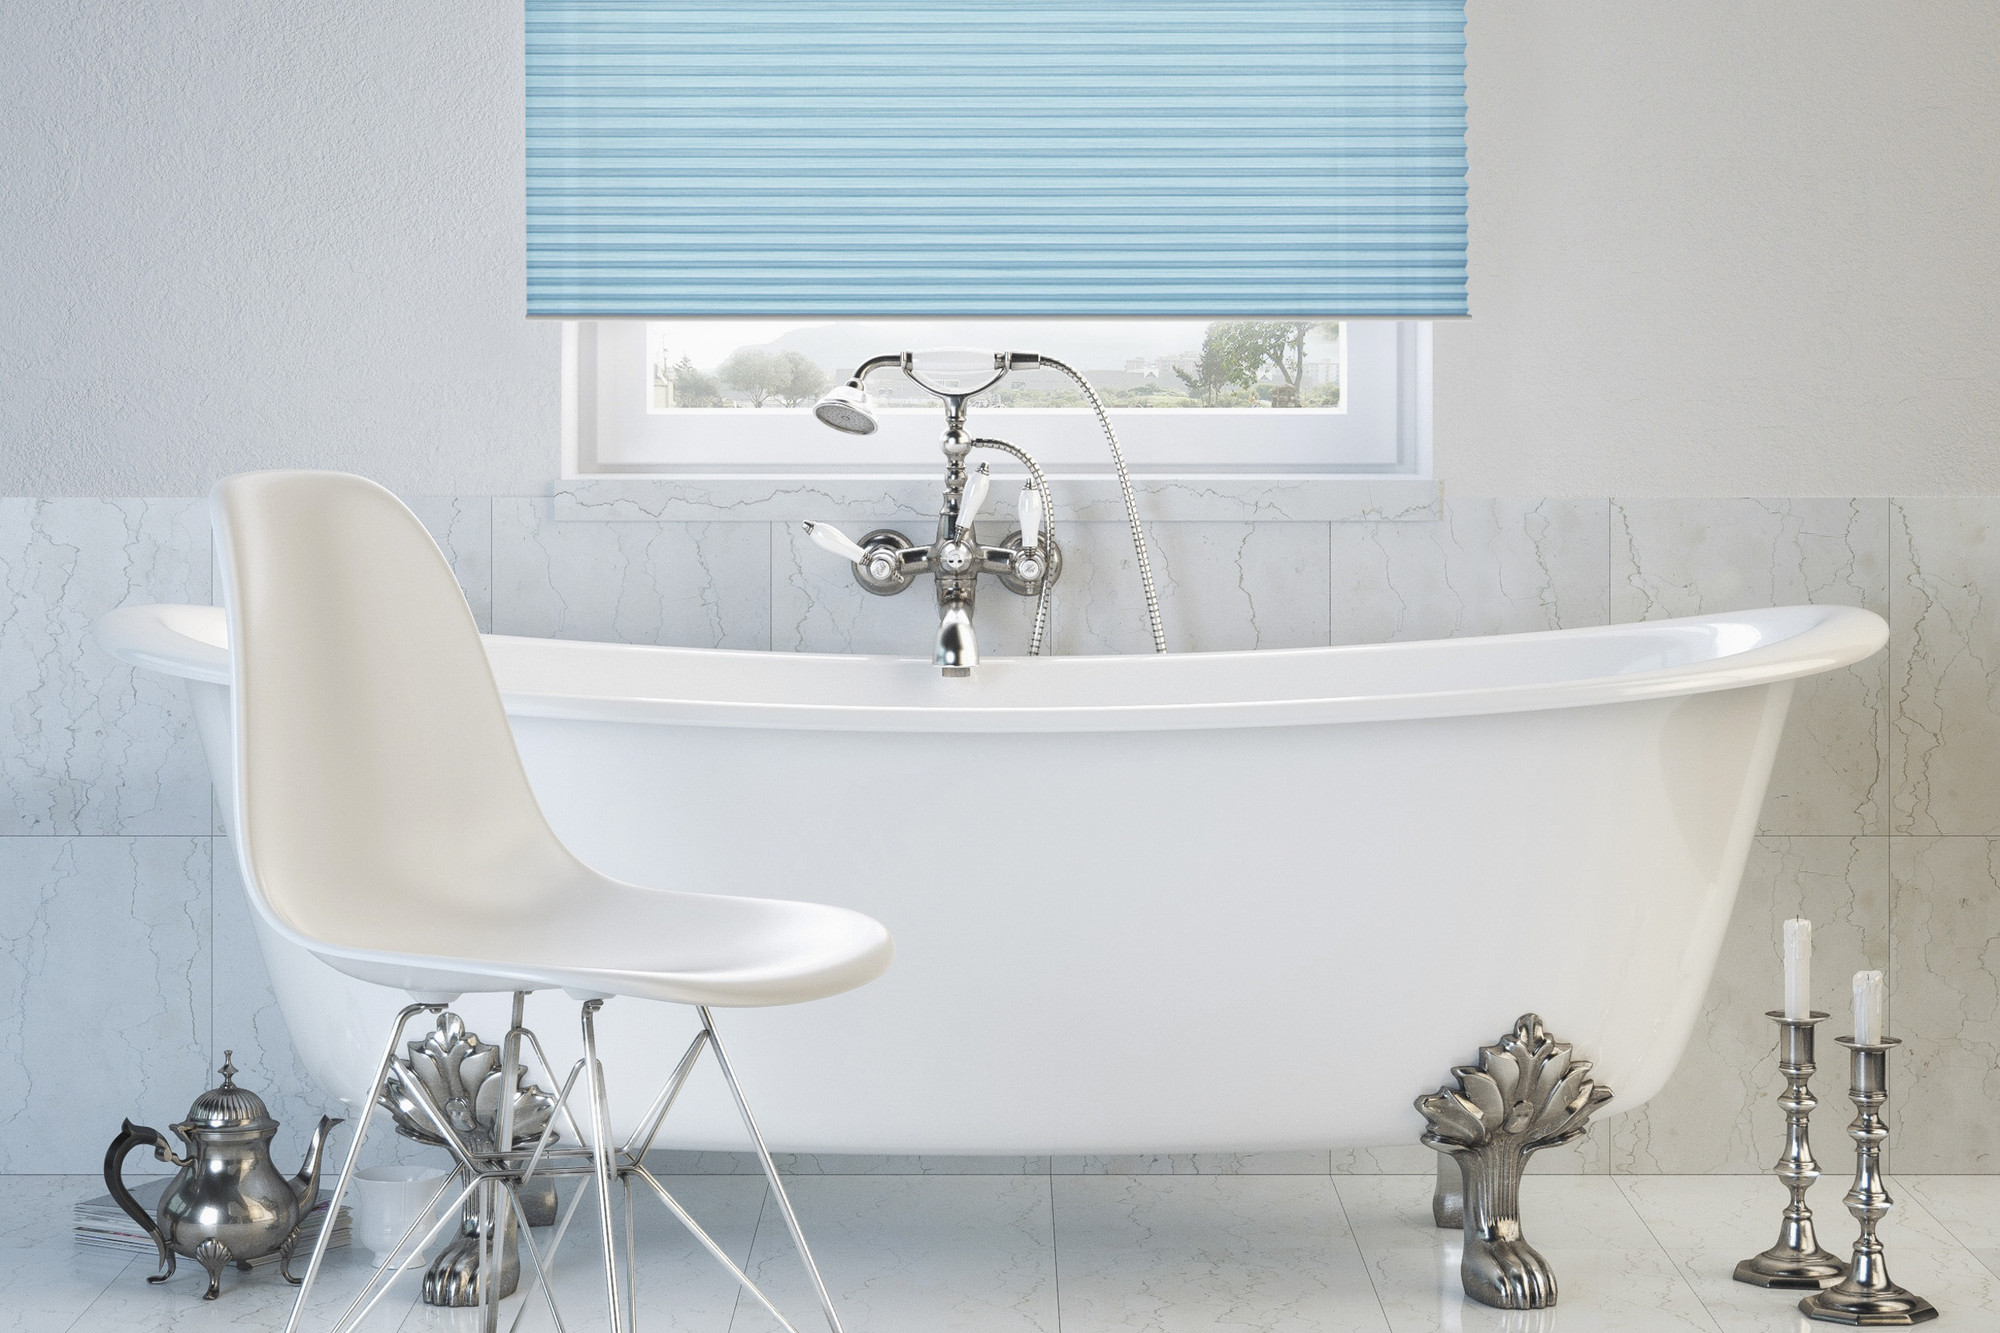 Product: Pleated blind